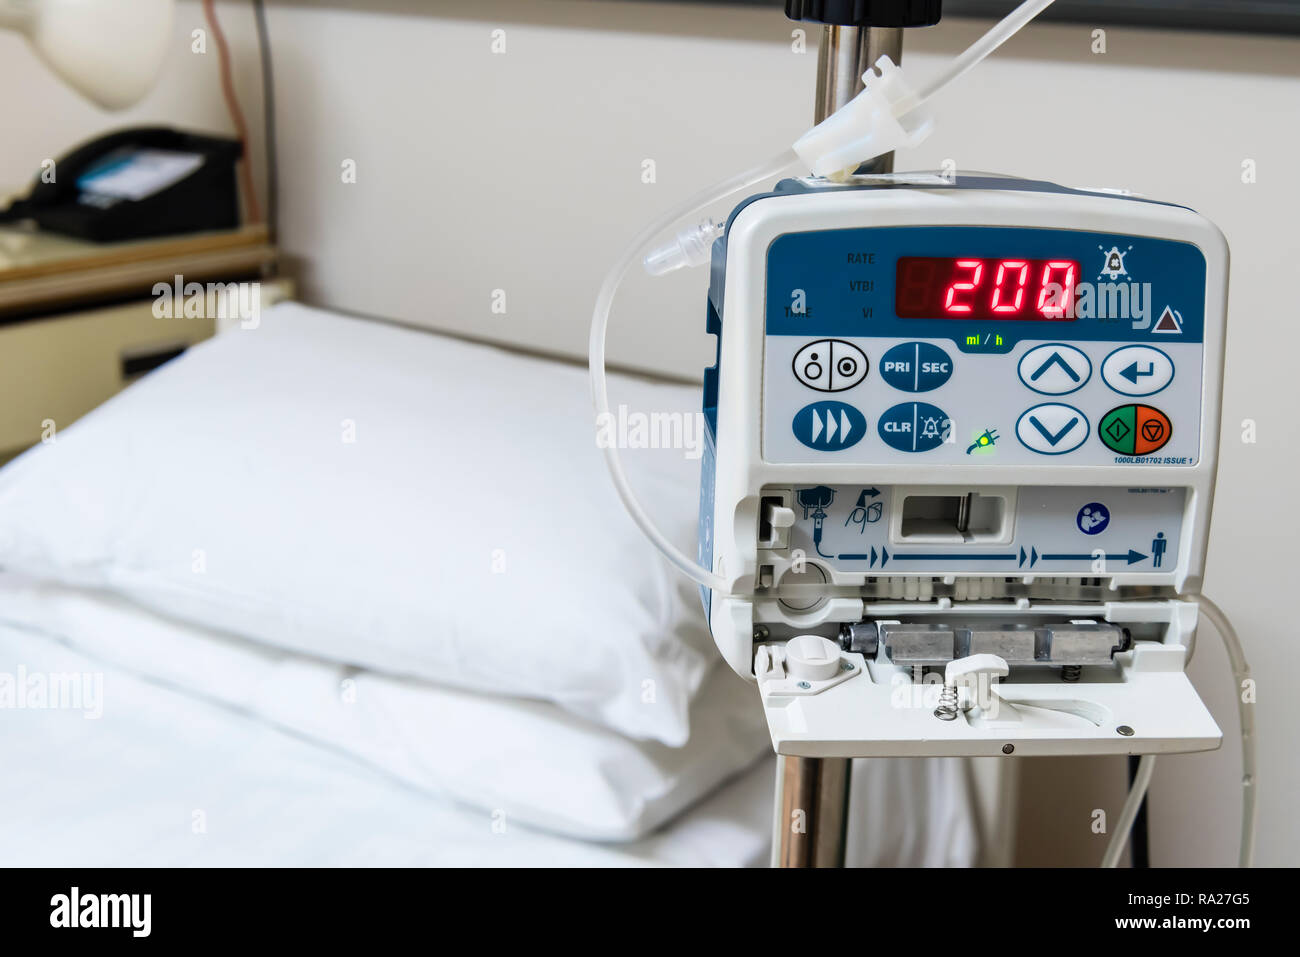 Drip infusion pump in a hospital ward, used to deliver controlled doses of fluids and medicines. Stock Photo